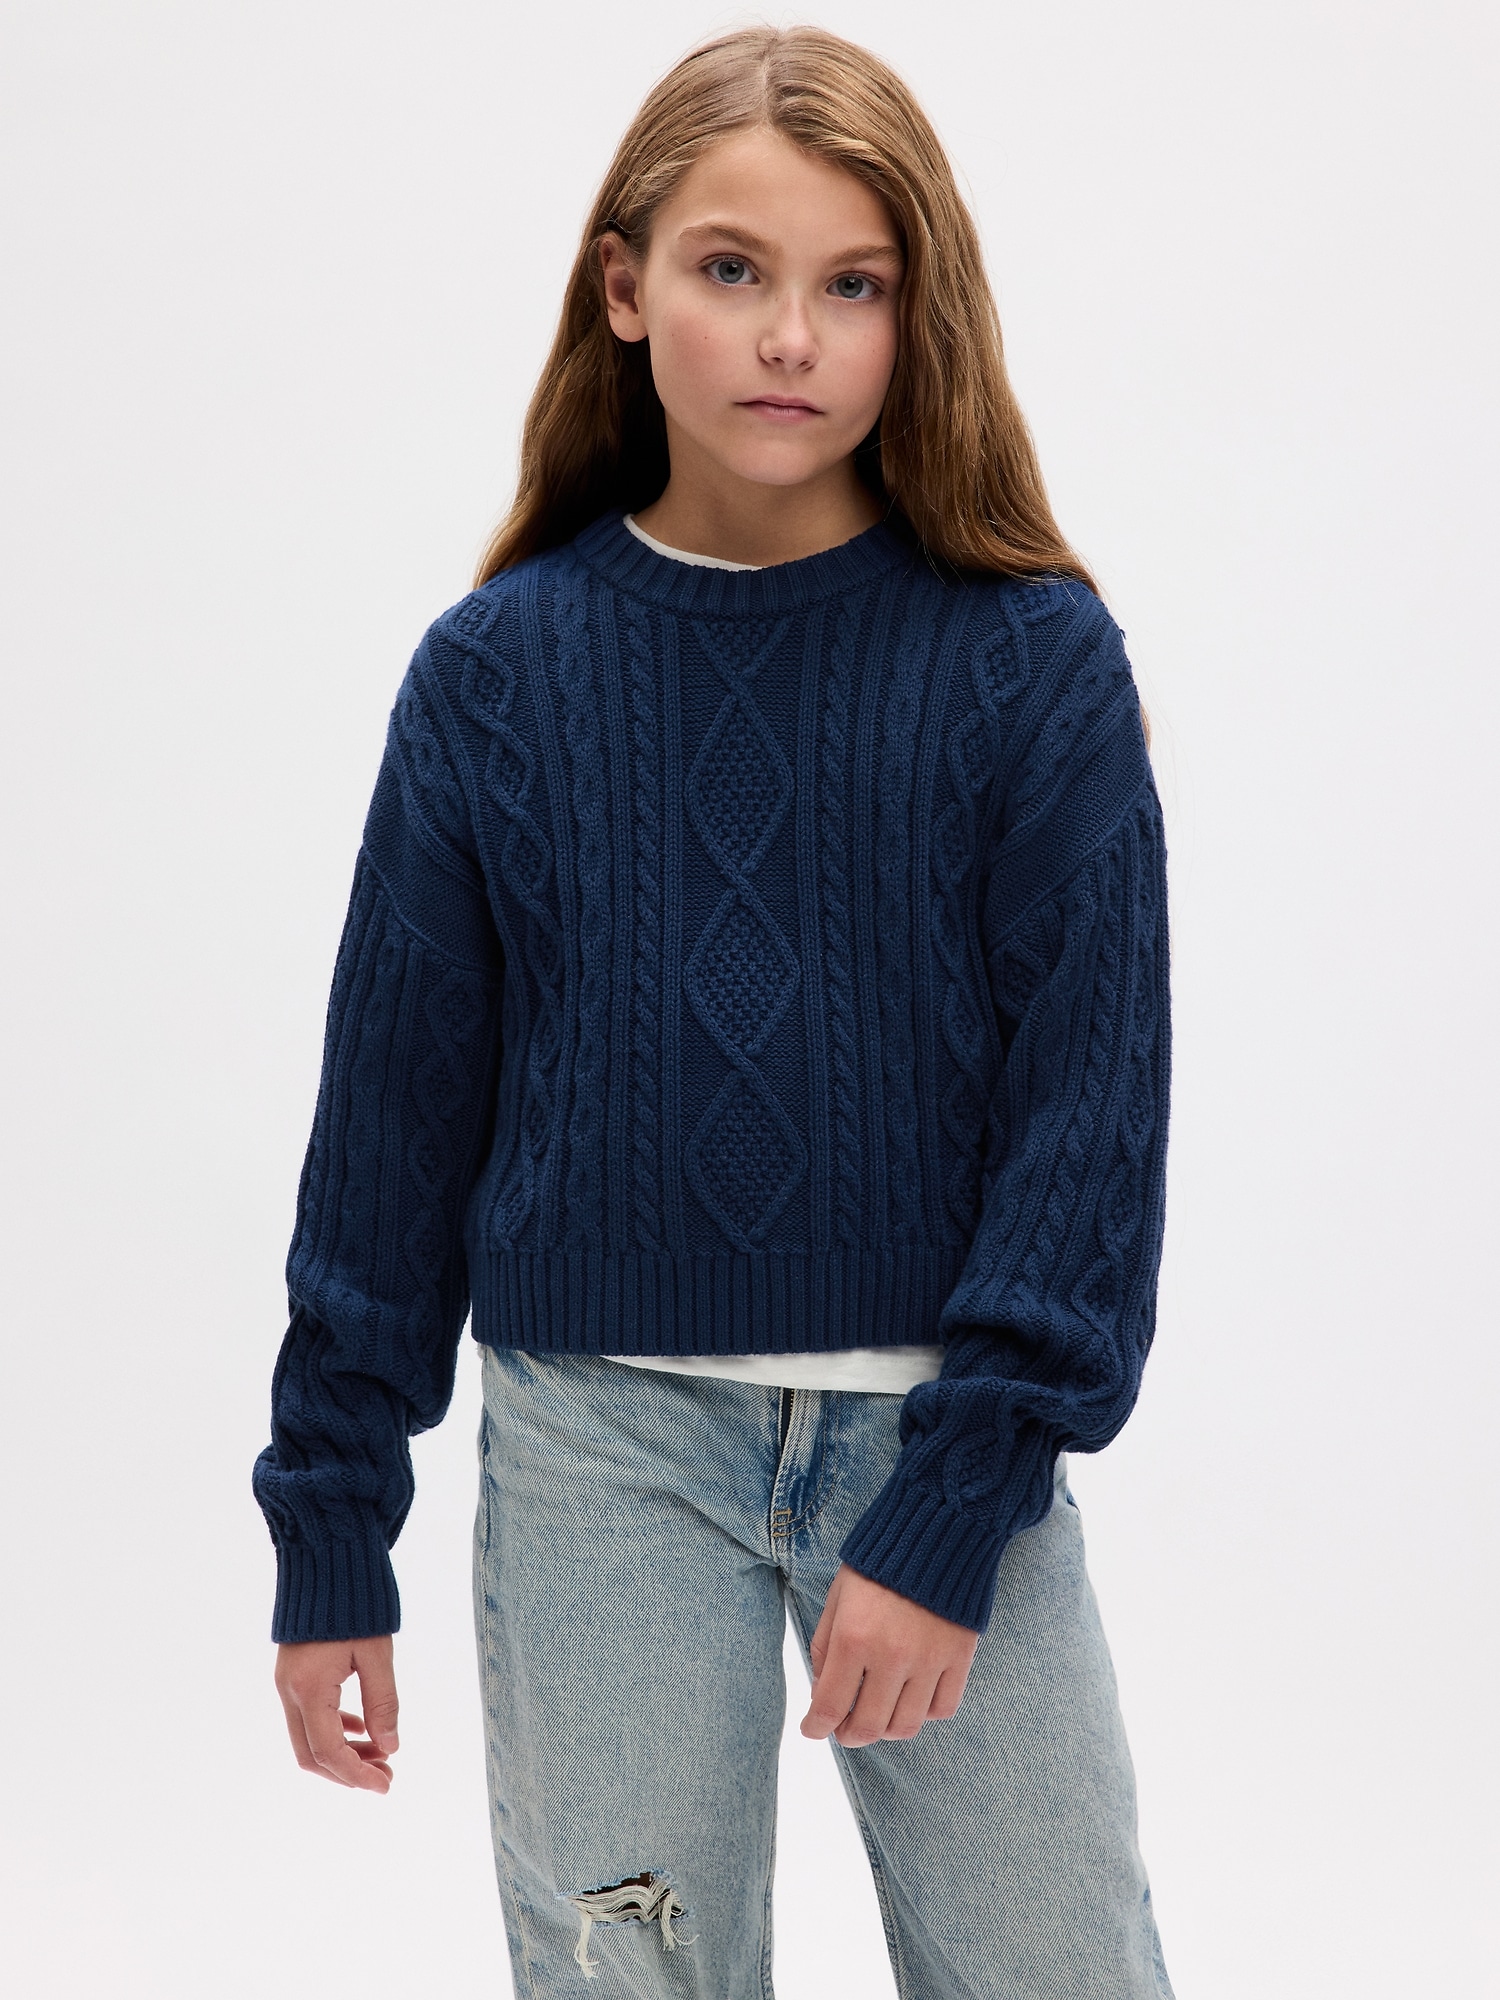 Kids Cable-Knit Sweater | Gap